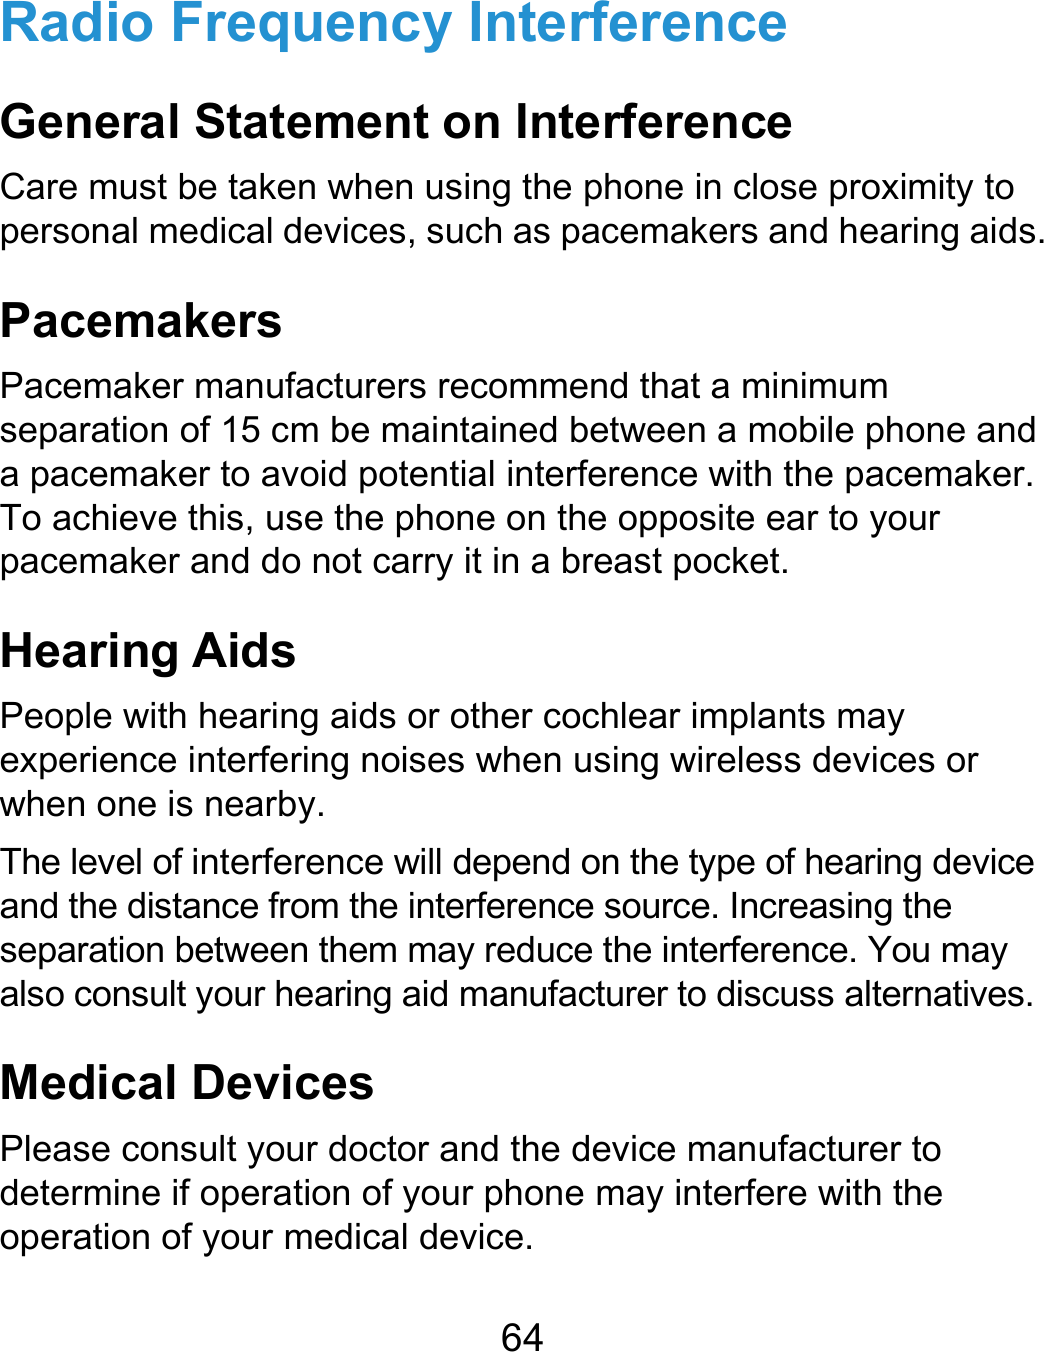  64 Radio Frequency Interference General Statement on Interference Care must be taken when using the phone in close proximity to personal medical devices, such as pacemakers and hearing aids. Pacemakers Pacemaker manufacturers recommend that a minimum separation of 15 cm be maintained between a mobile phone and a pacemaker to avoid potential interference with the pacemaker. To achieve this, use the phone on the opposite ear to your pacemaker and do not carry it in a breast pocket. Hearing Aids People with hearing aids or other cochlear implants may experience interfering noises when using wireless devices or when one is nearby. The level of interference will depend on the type of hearing device and the distance from the interference source. Increasing the separation between them may reduce the interference. You may also consult your hearing aid manufacturer to discuss alternatives. Medical Devices Please consult your doctor and the device manufacturer to determine if operation of your phone may interfere with the operation of your medical device. 